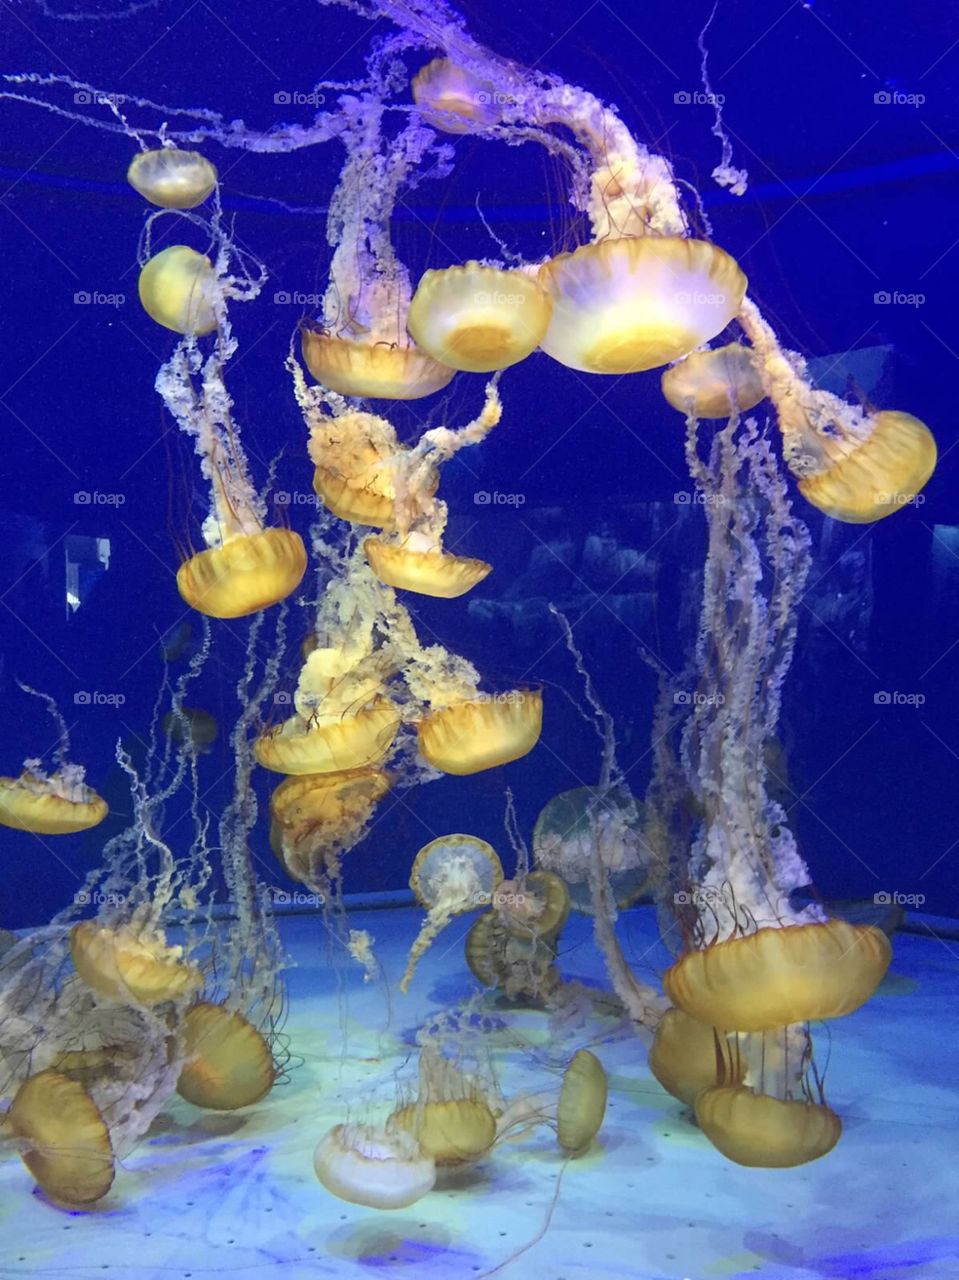 Jellies . Loved the new exhibit at the Aquarium of the Pacific 